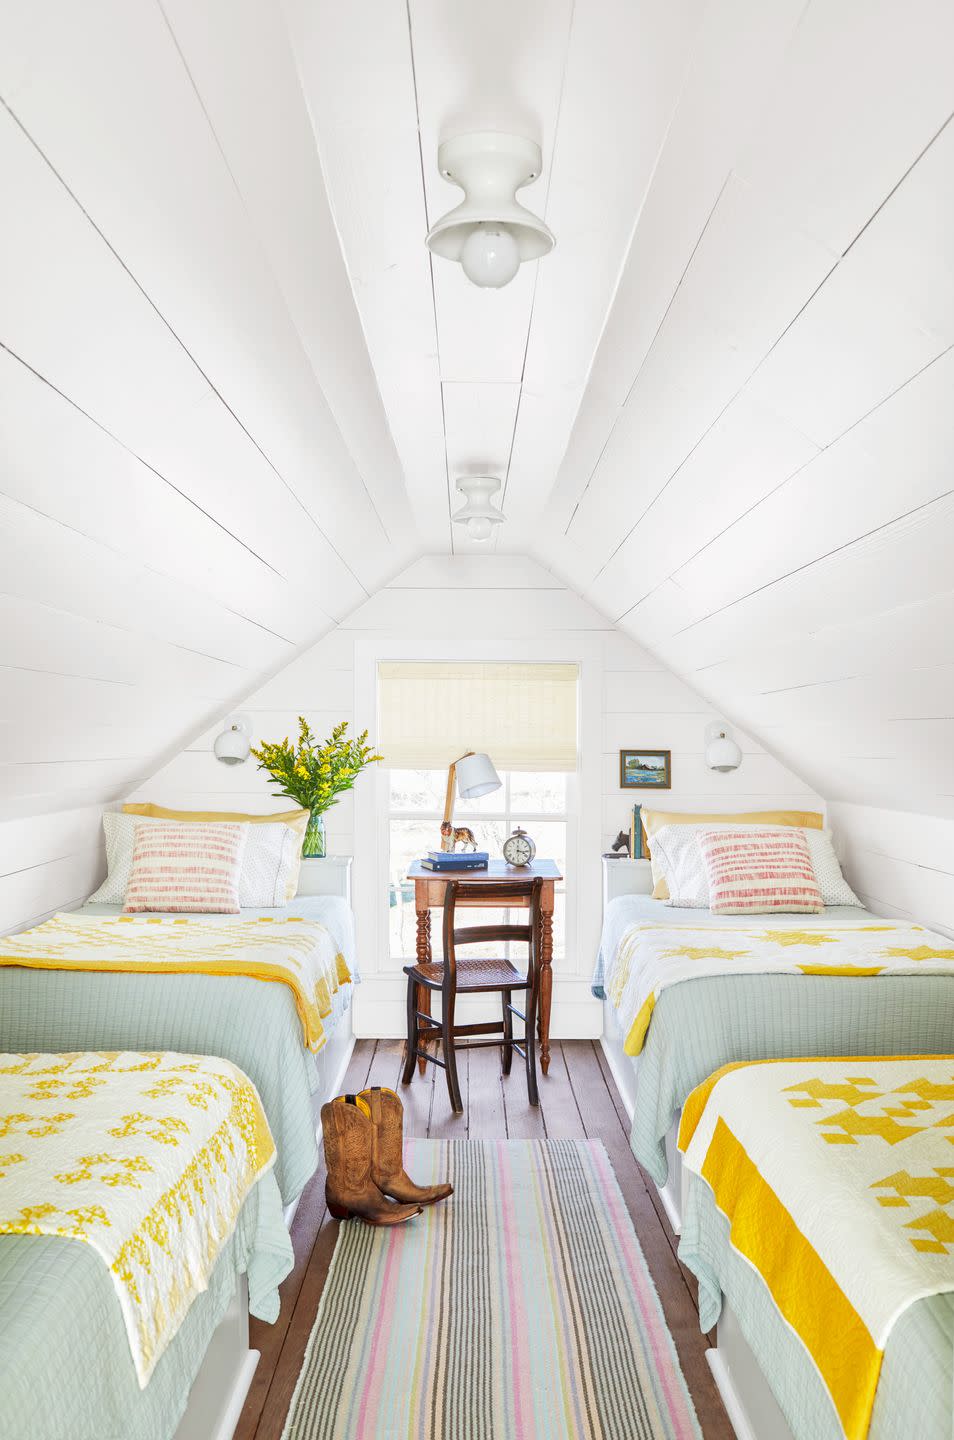 white attic bedroom with yellow pieced quilts on the four beds